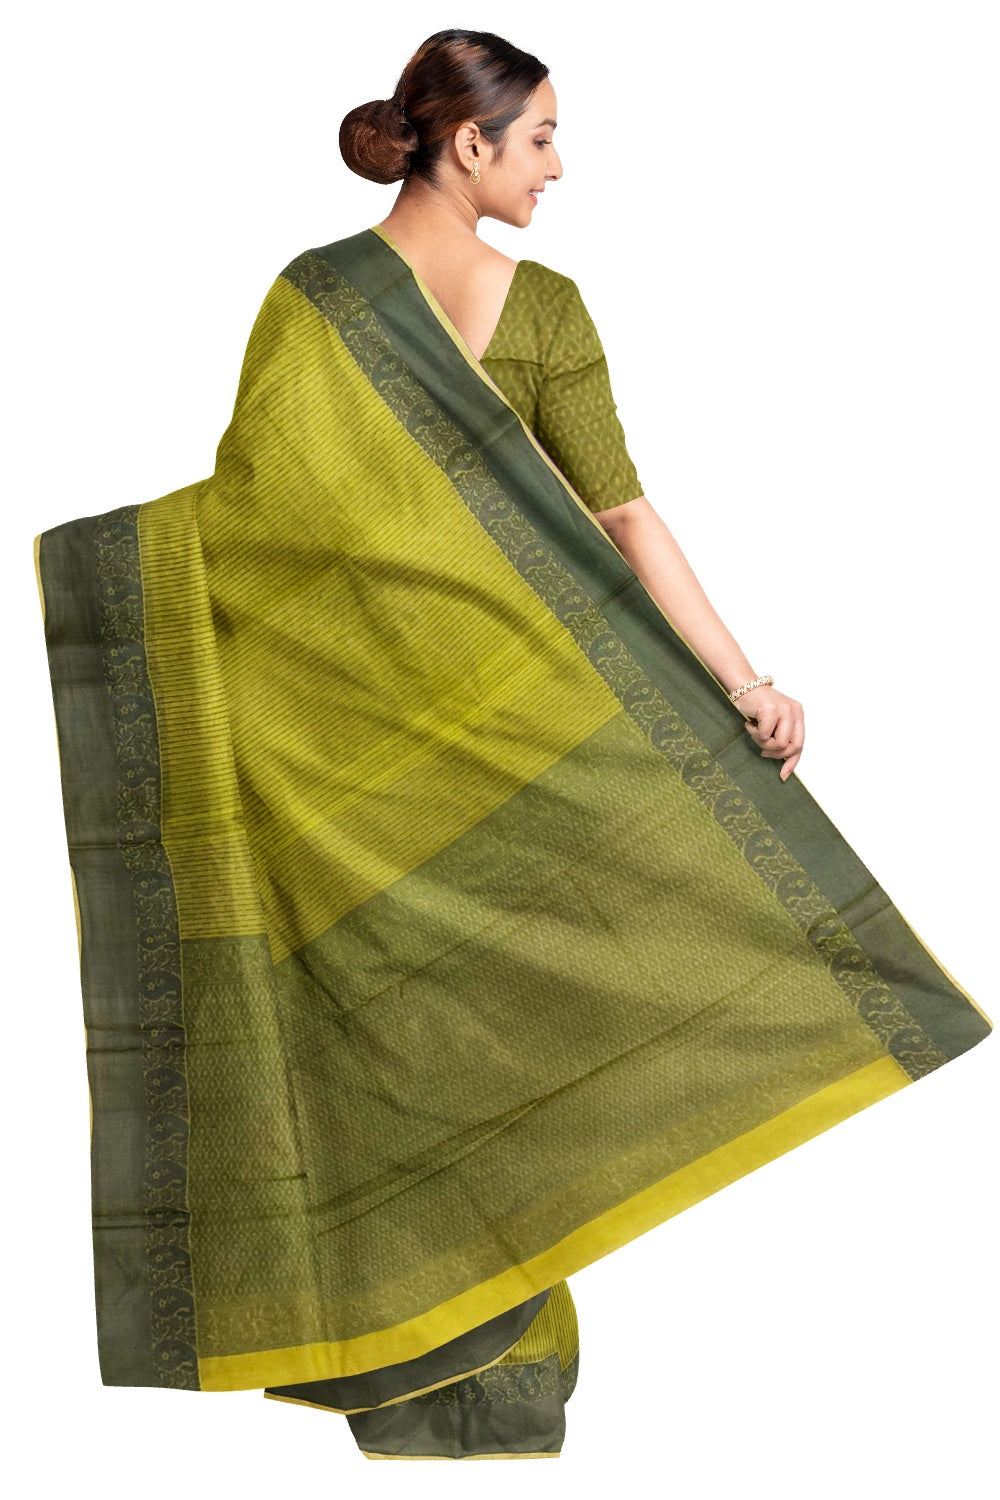 Southloom Sico Gadwal Semi Silk Saree in Green and Grey with Paisley Motifs (Blouse Piece with Work)